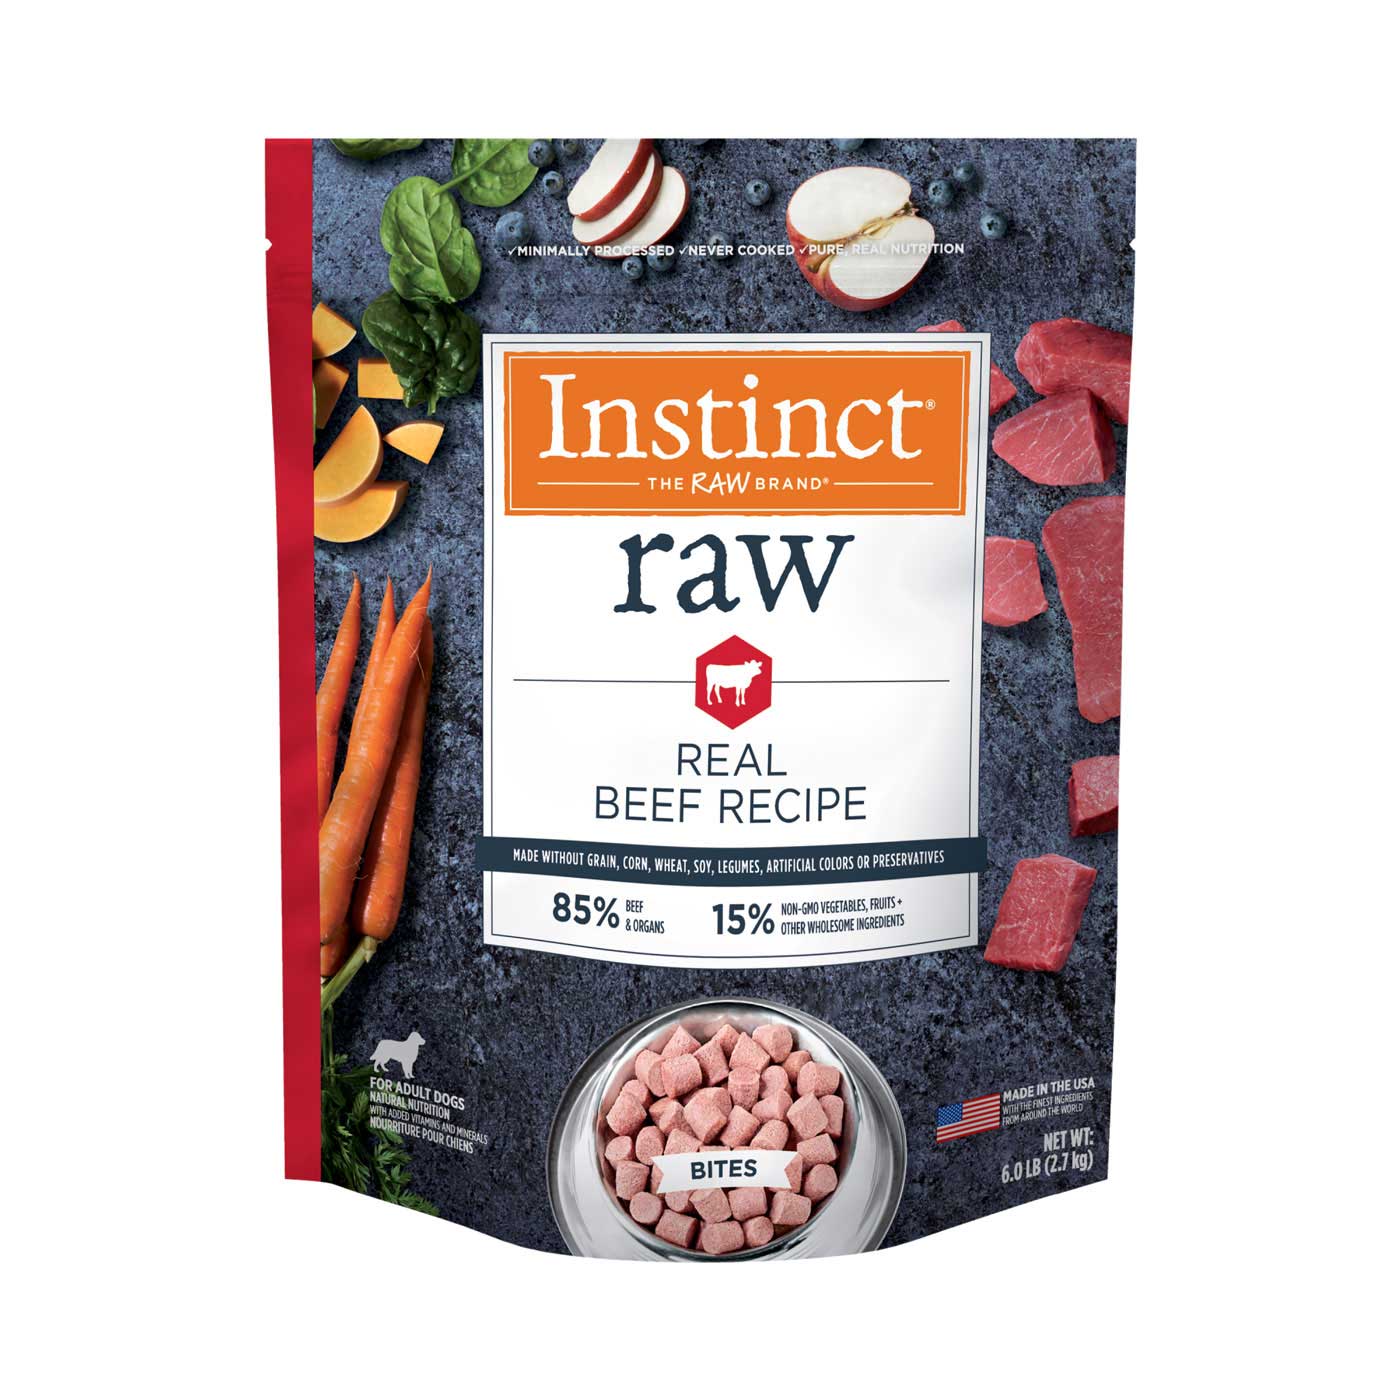 Instinct Frozen Raw Bites Grain-Free Real Beef Recipe Dog Food, 6 Pound Bag - Not Available for Delivery